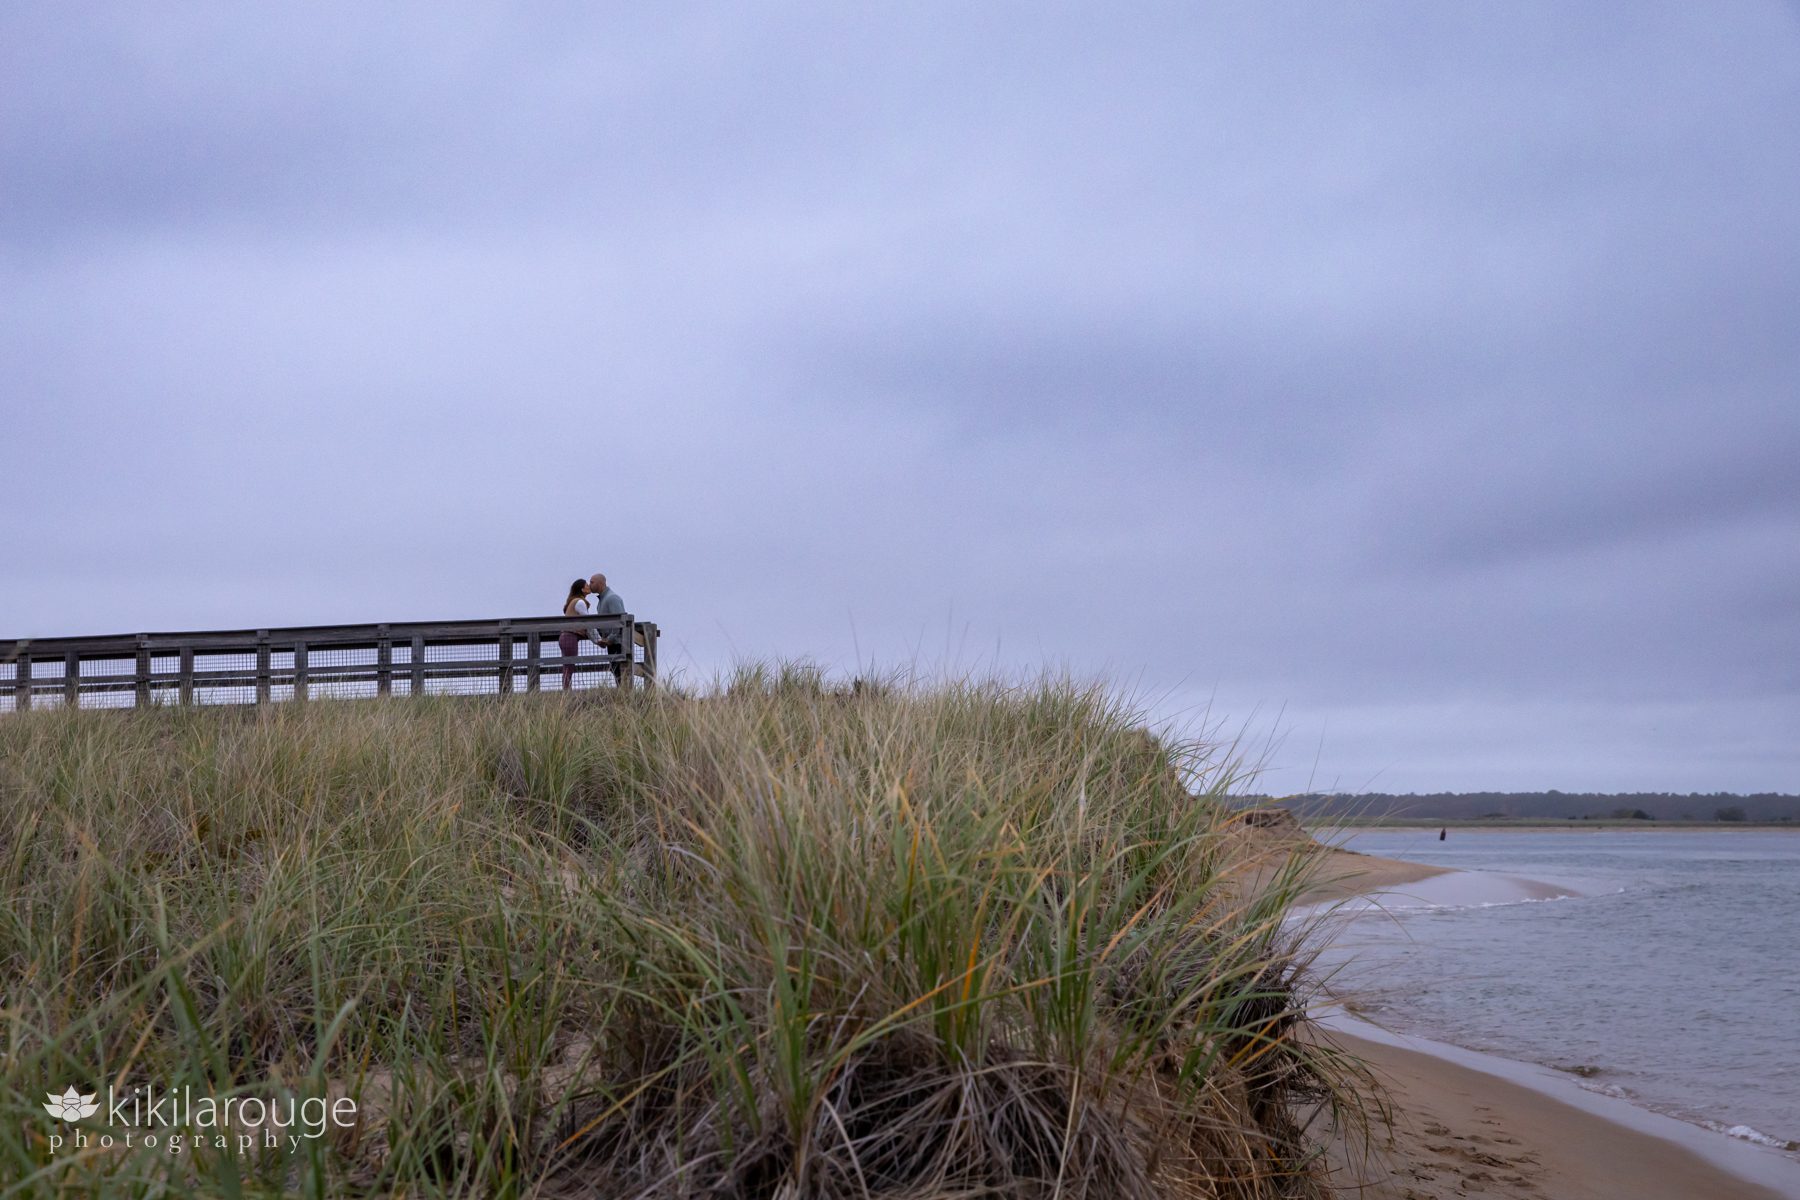 Landscape view of Plum Island beach with a couple in silhouette on the end of the boardwalk in the distance kissing